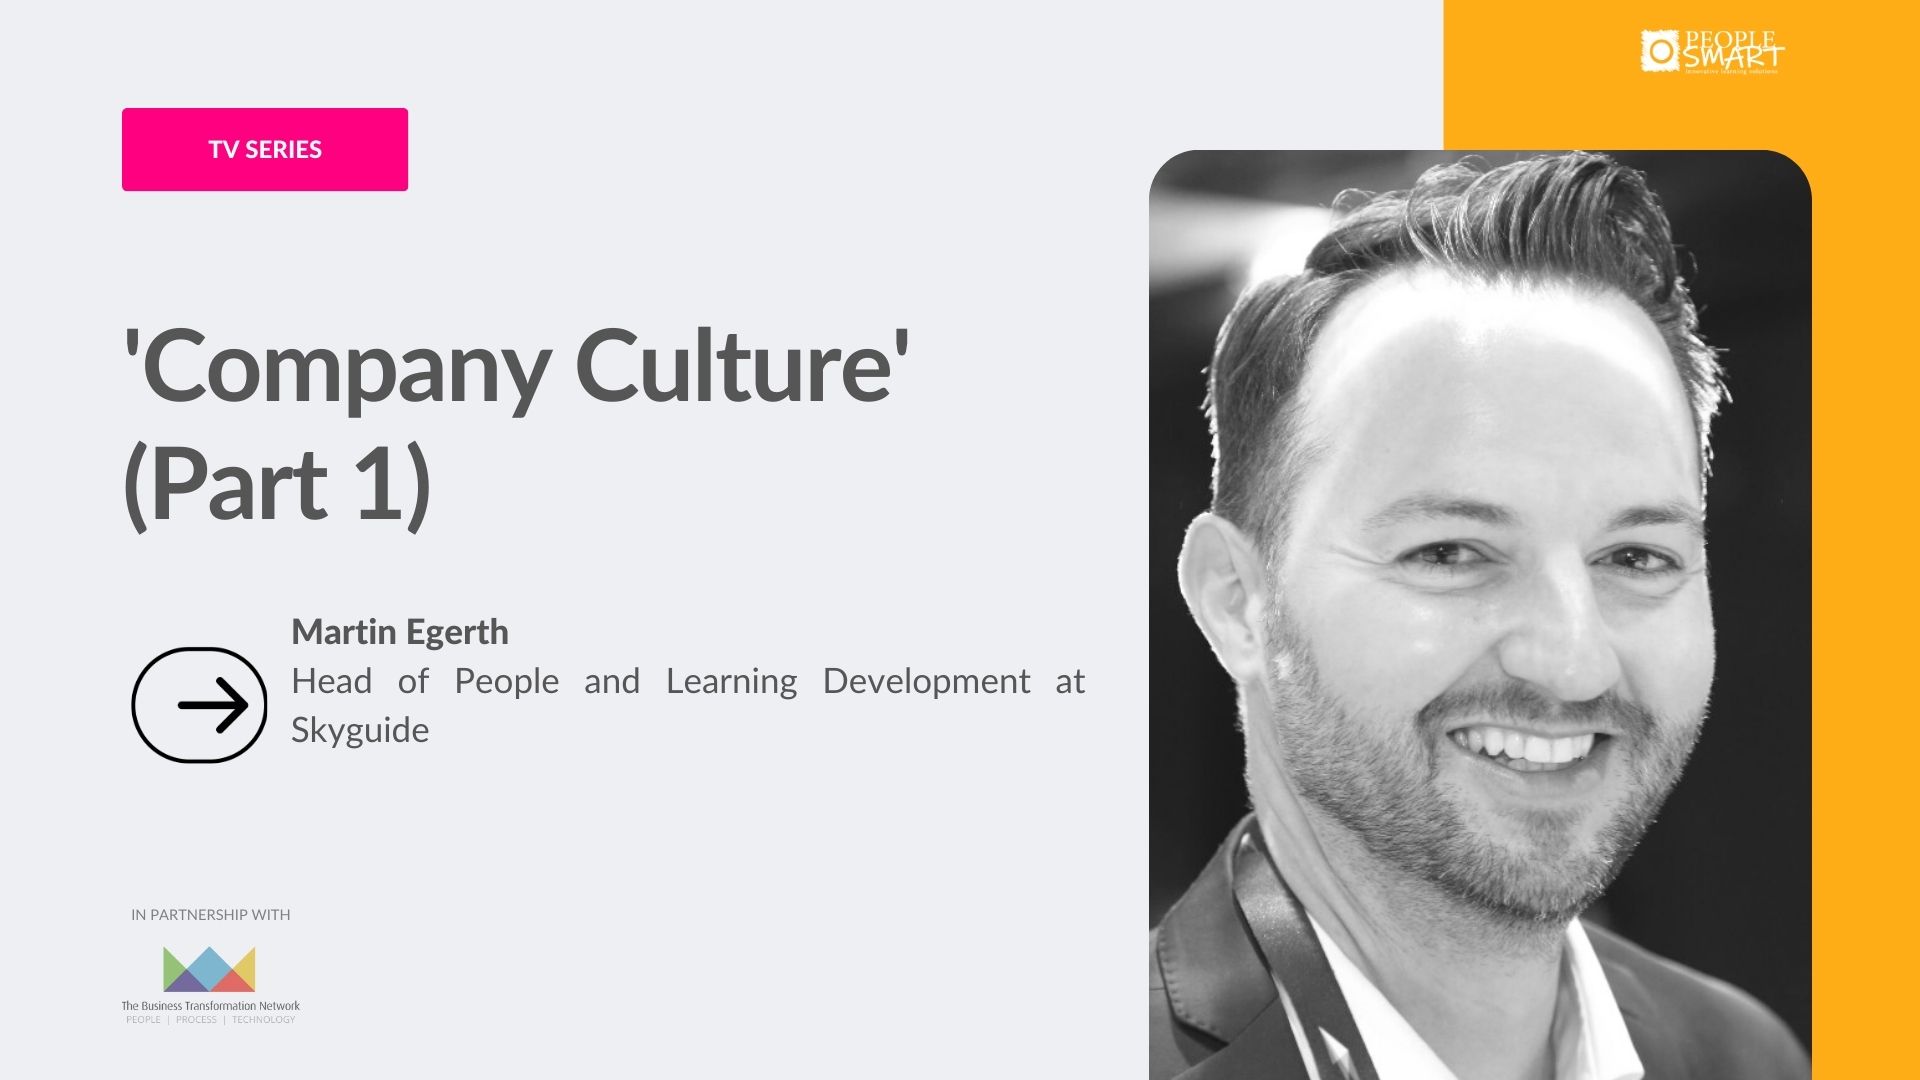 ‘Company Culture’ with Martin Egerth (Part 1)